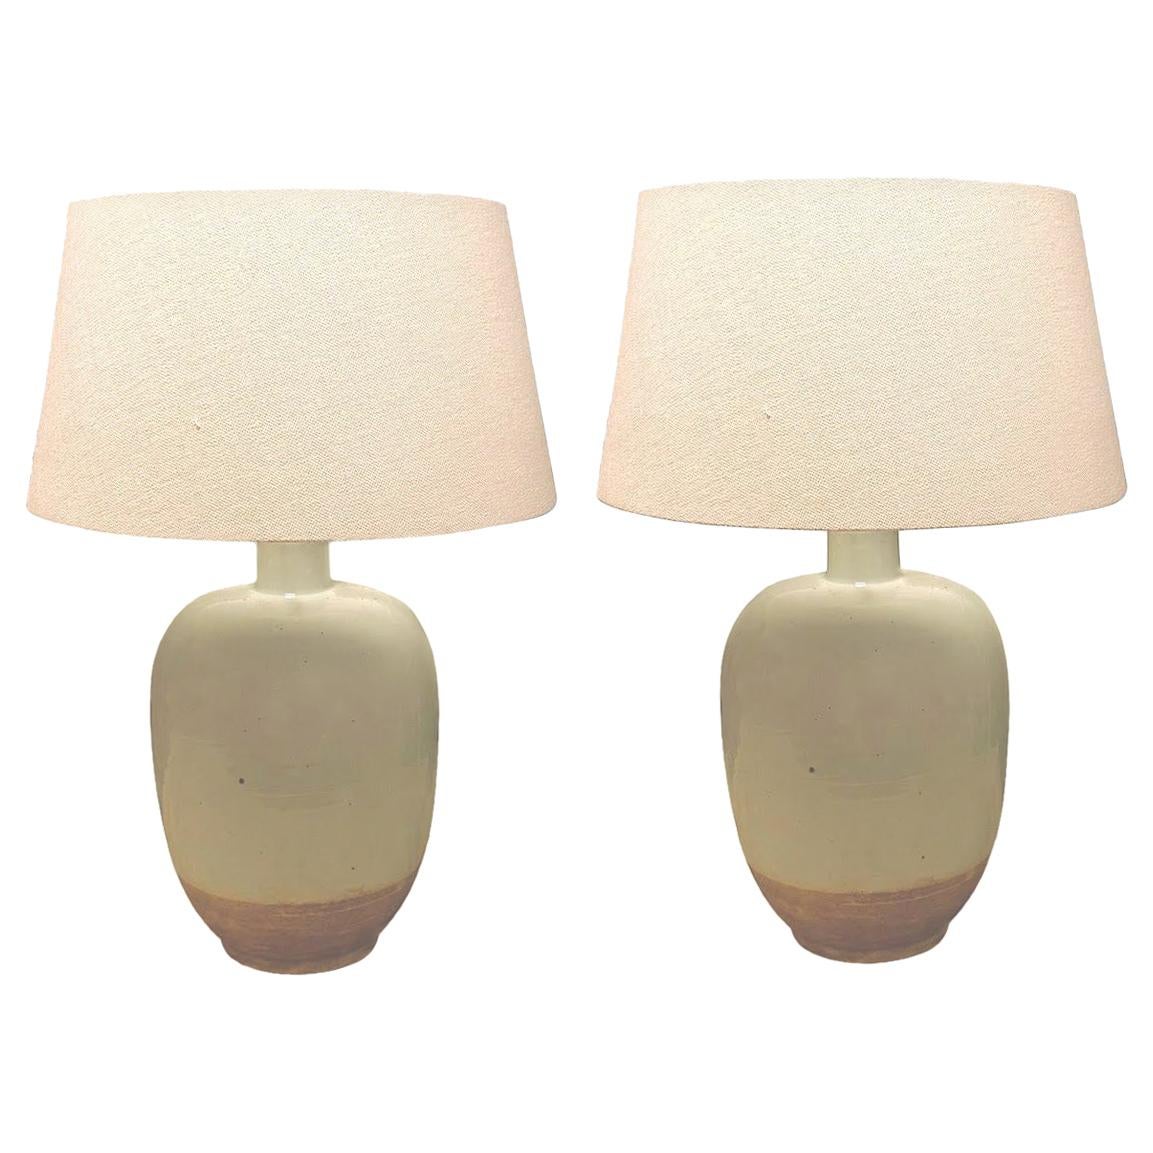 Pale Blue with Exposed Terra Cotta Base Pair of Lamps, China, Contemporary